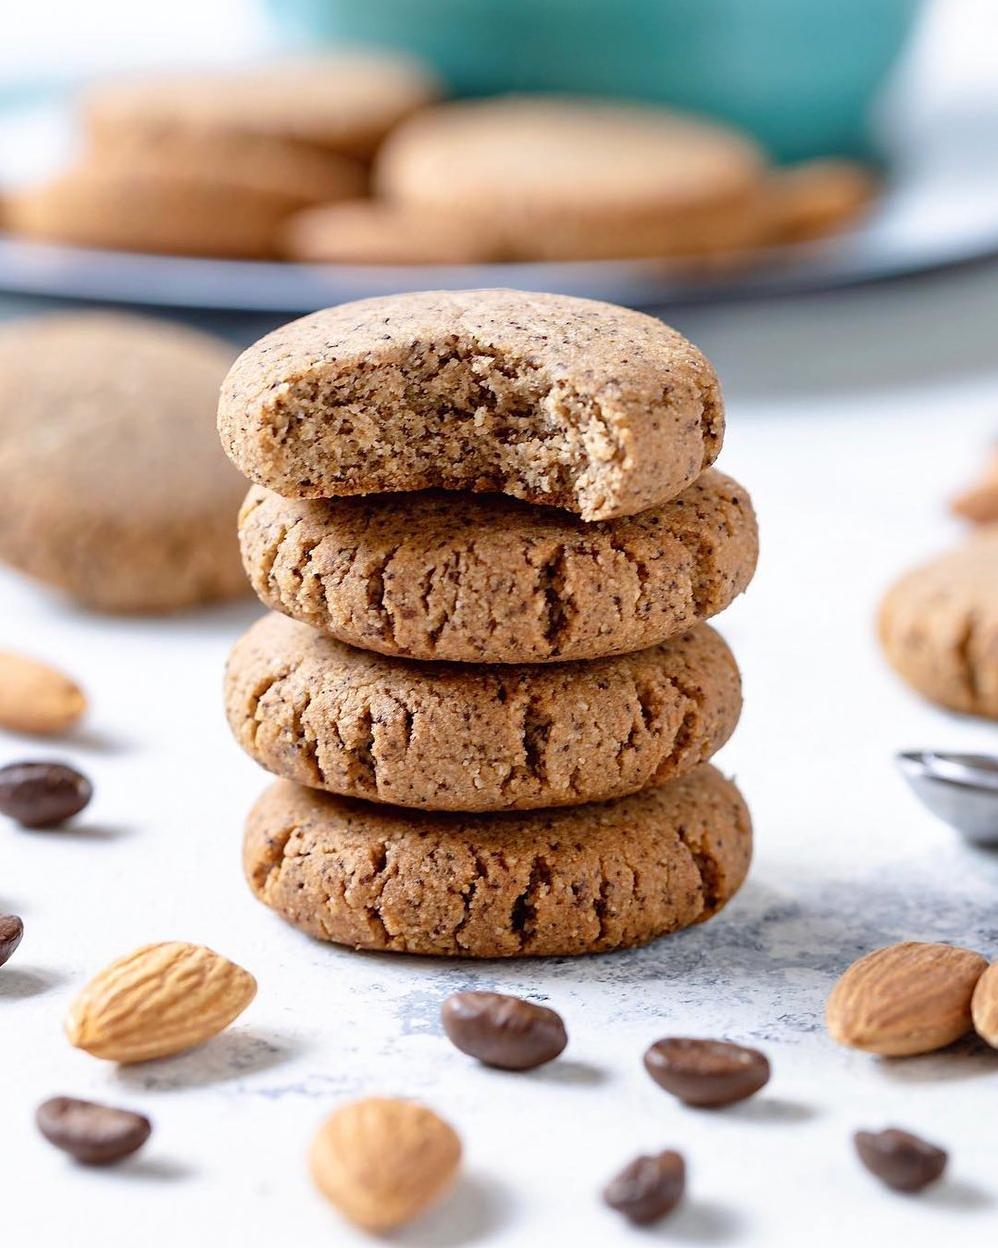  The delicious aroma of freshly brewed coffee is perfectly captured in every bite of these cookies.